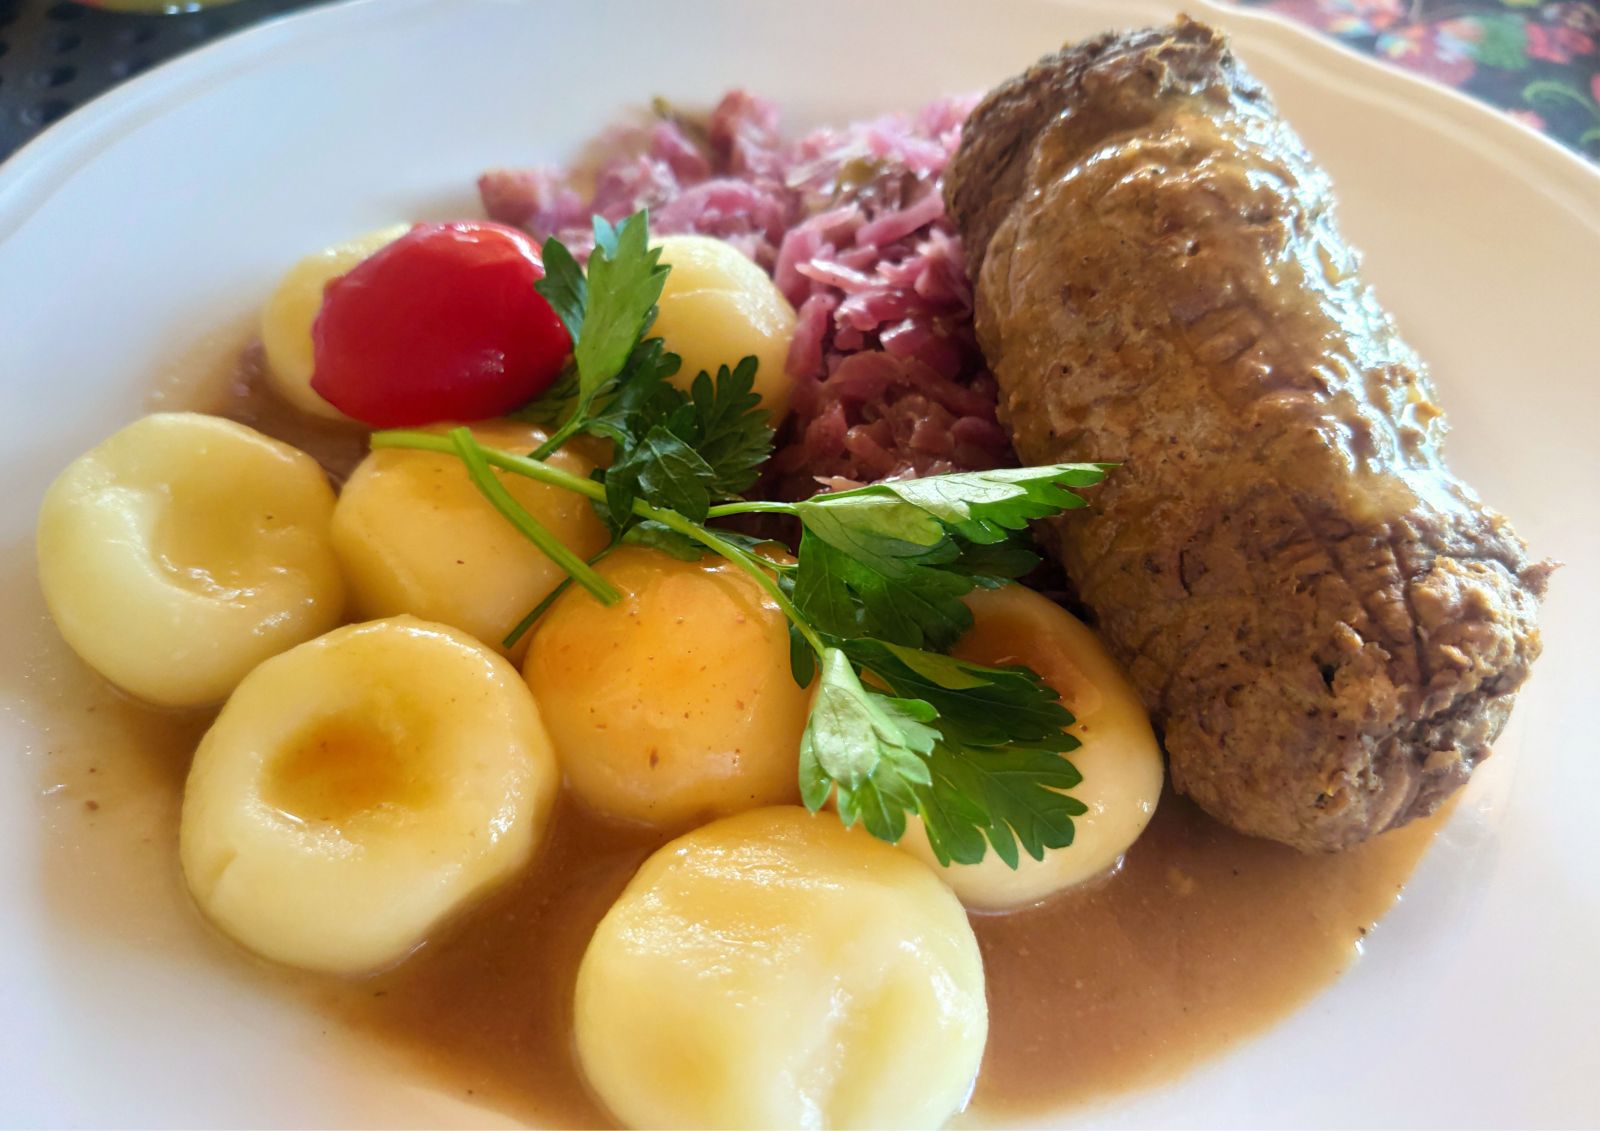 Multicultural Polish Cuisine is where East meets West